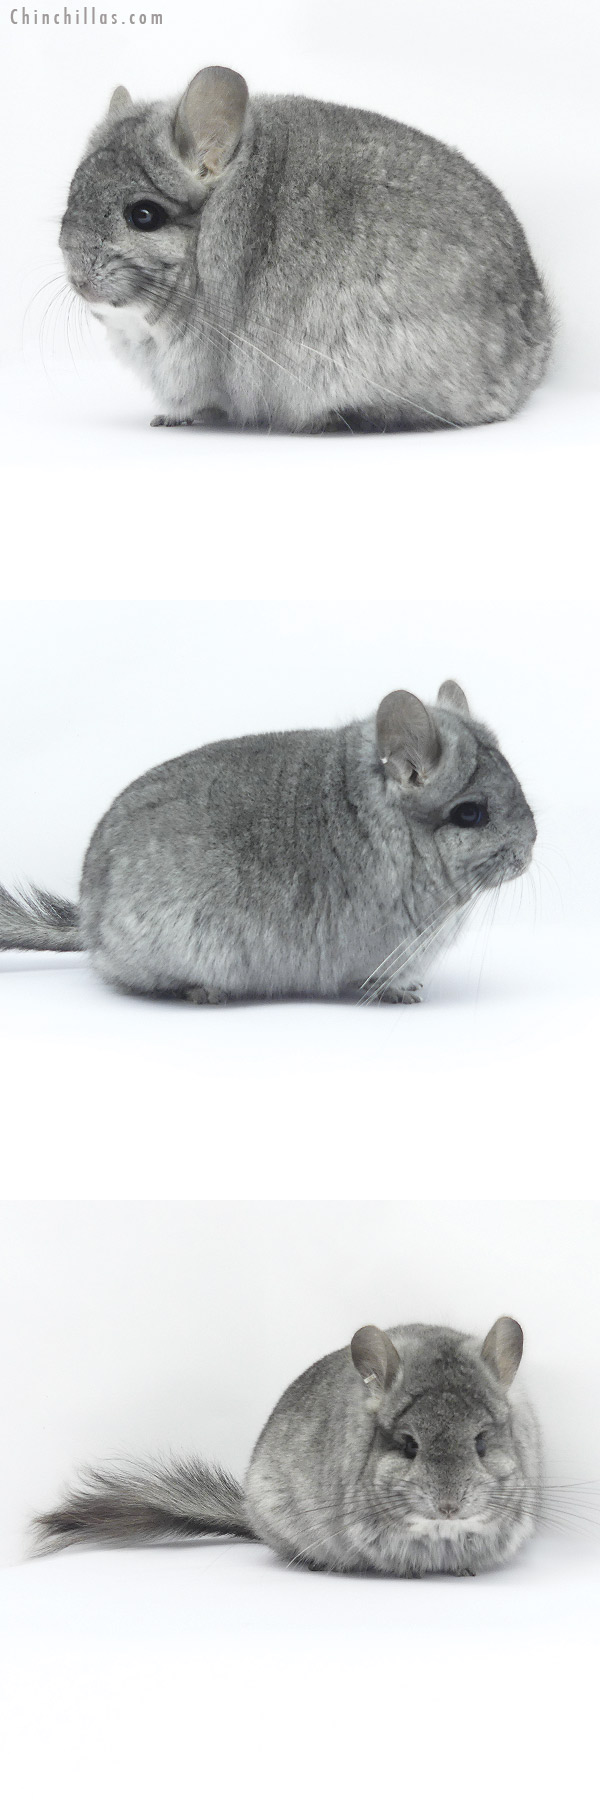 Chinchilla or related item offered for sale or export on Chinchillas.com - 19387 Blocky Standard  Royal Persian Angora Female Chinchilla